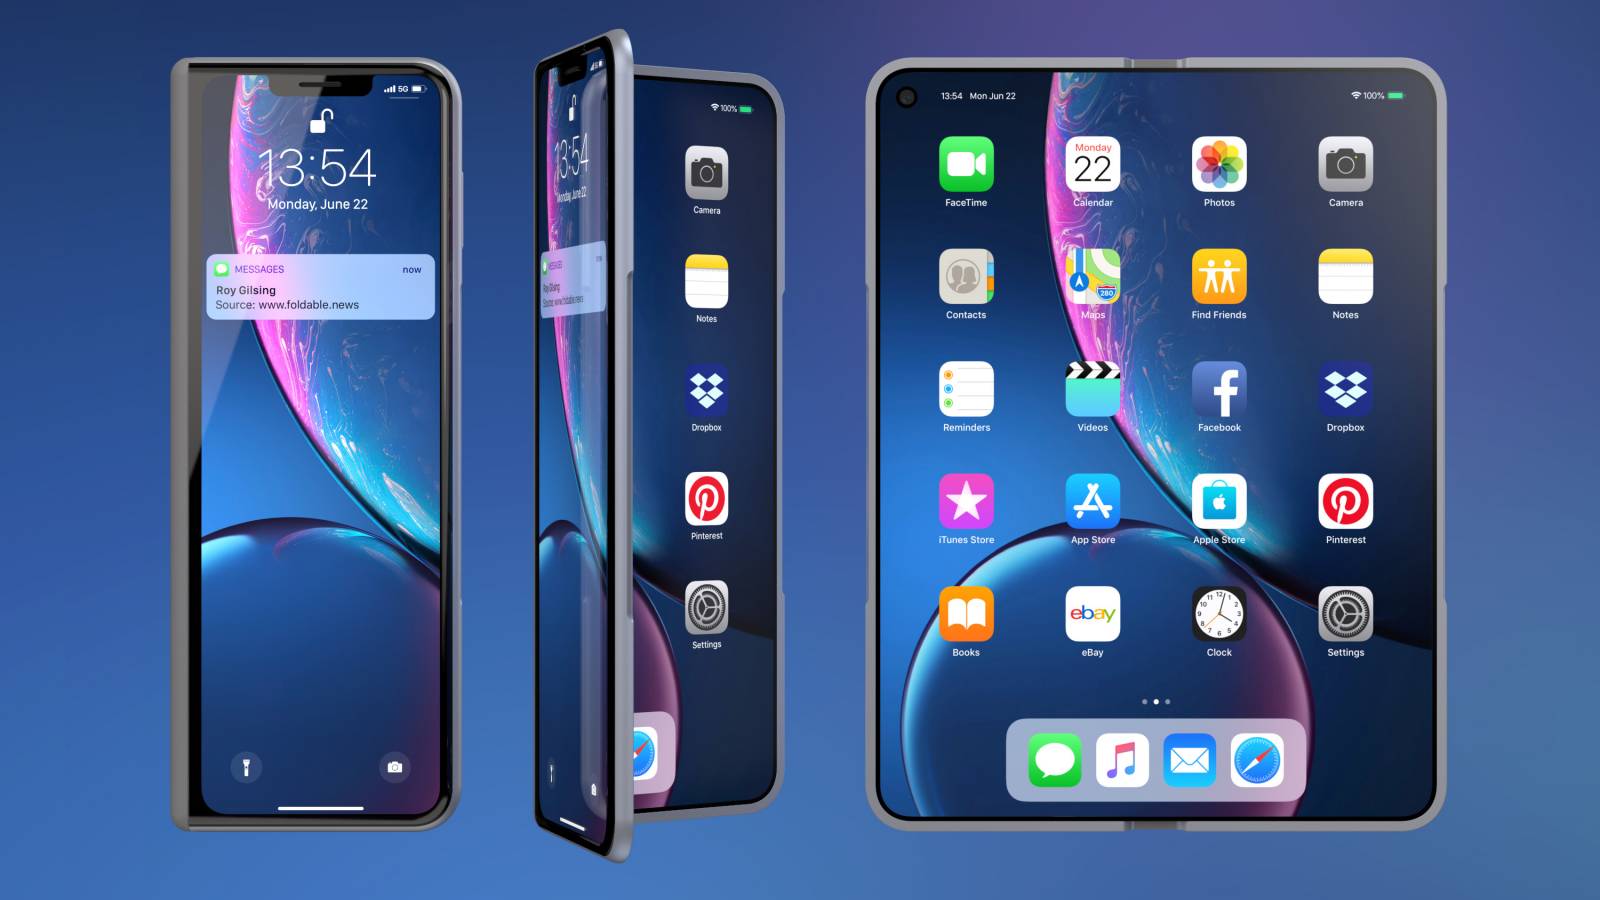 iPhone Details Apple's First Foldable Phone